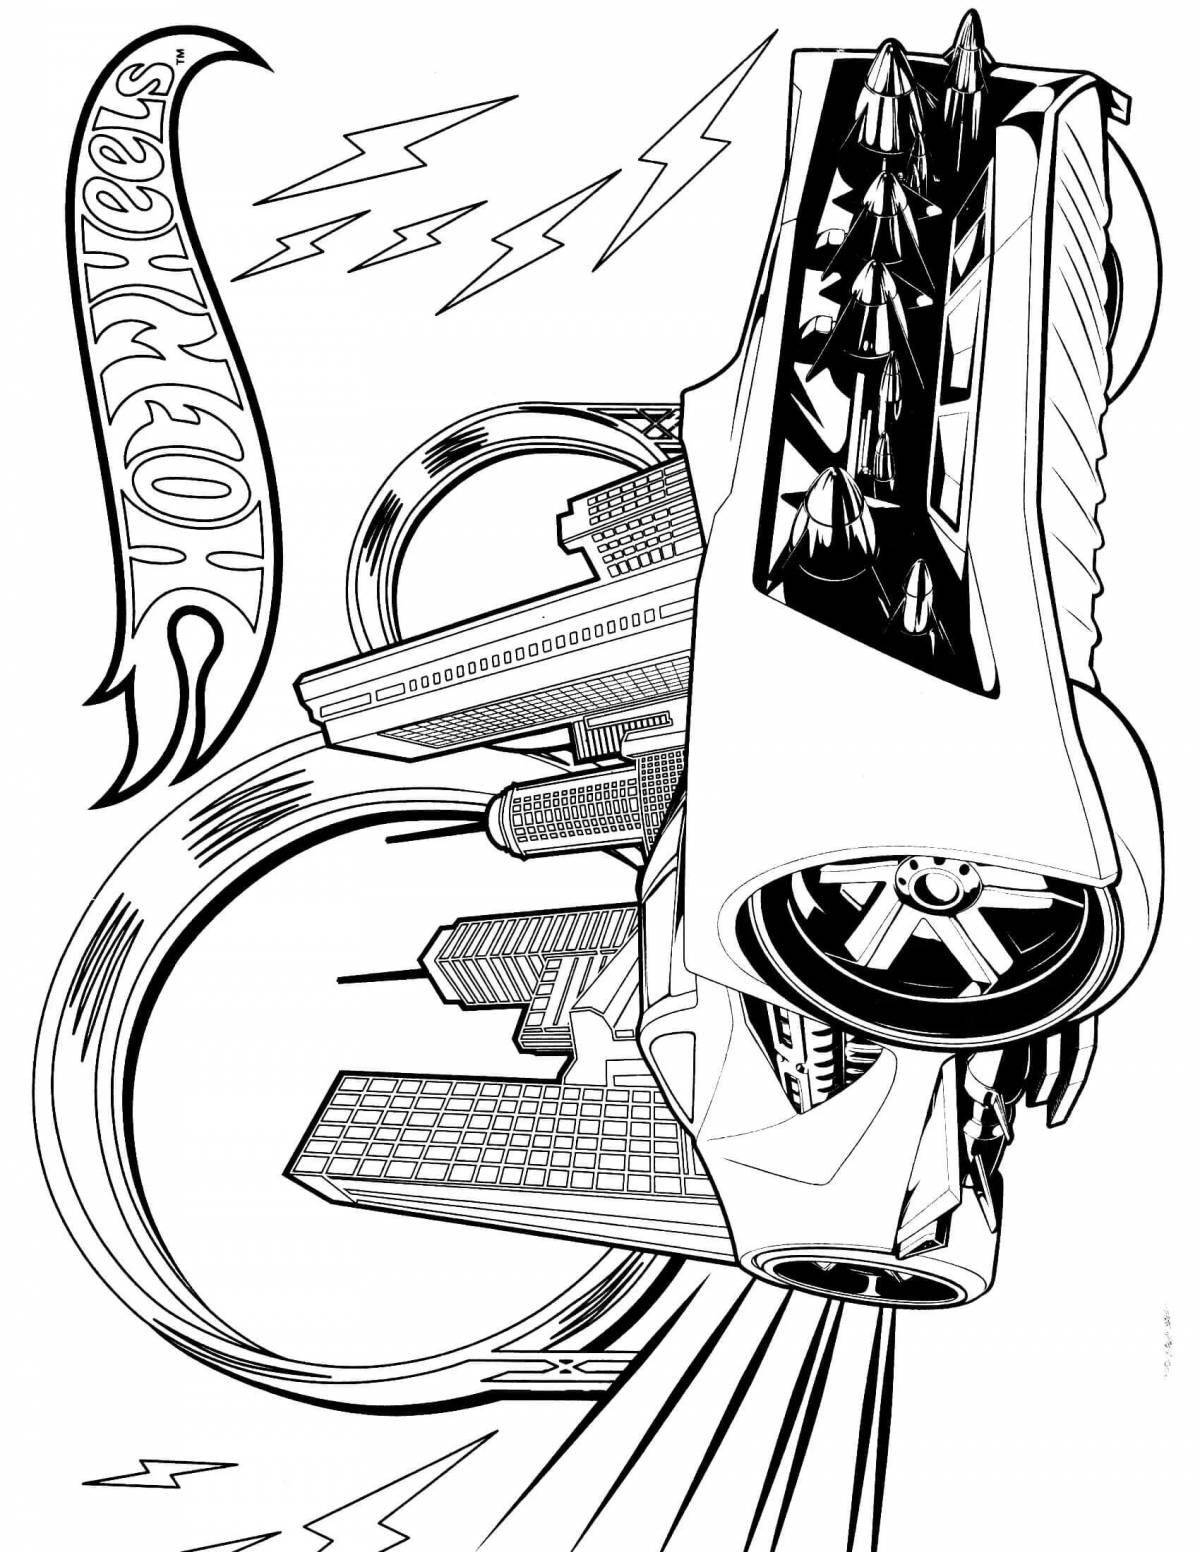 Coloring page of the hot wheels track